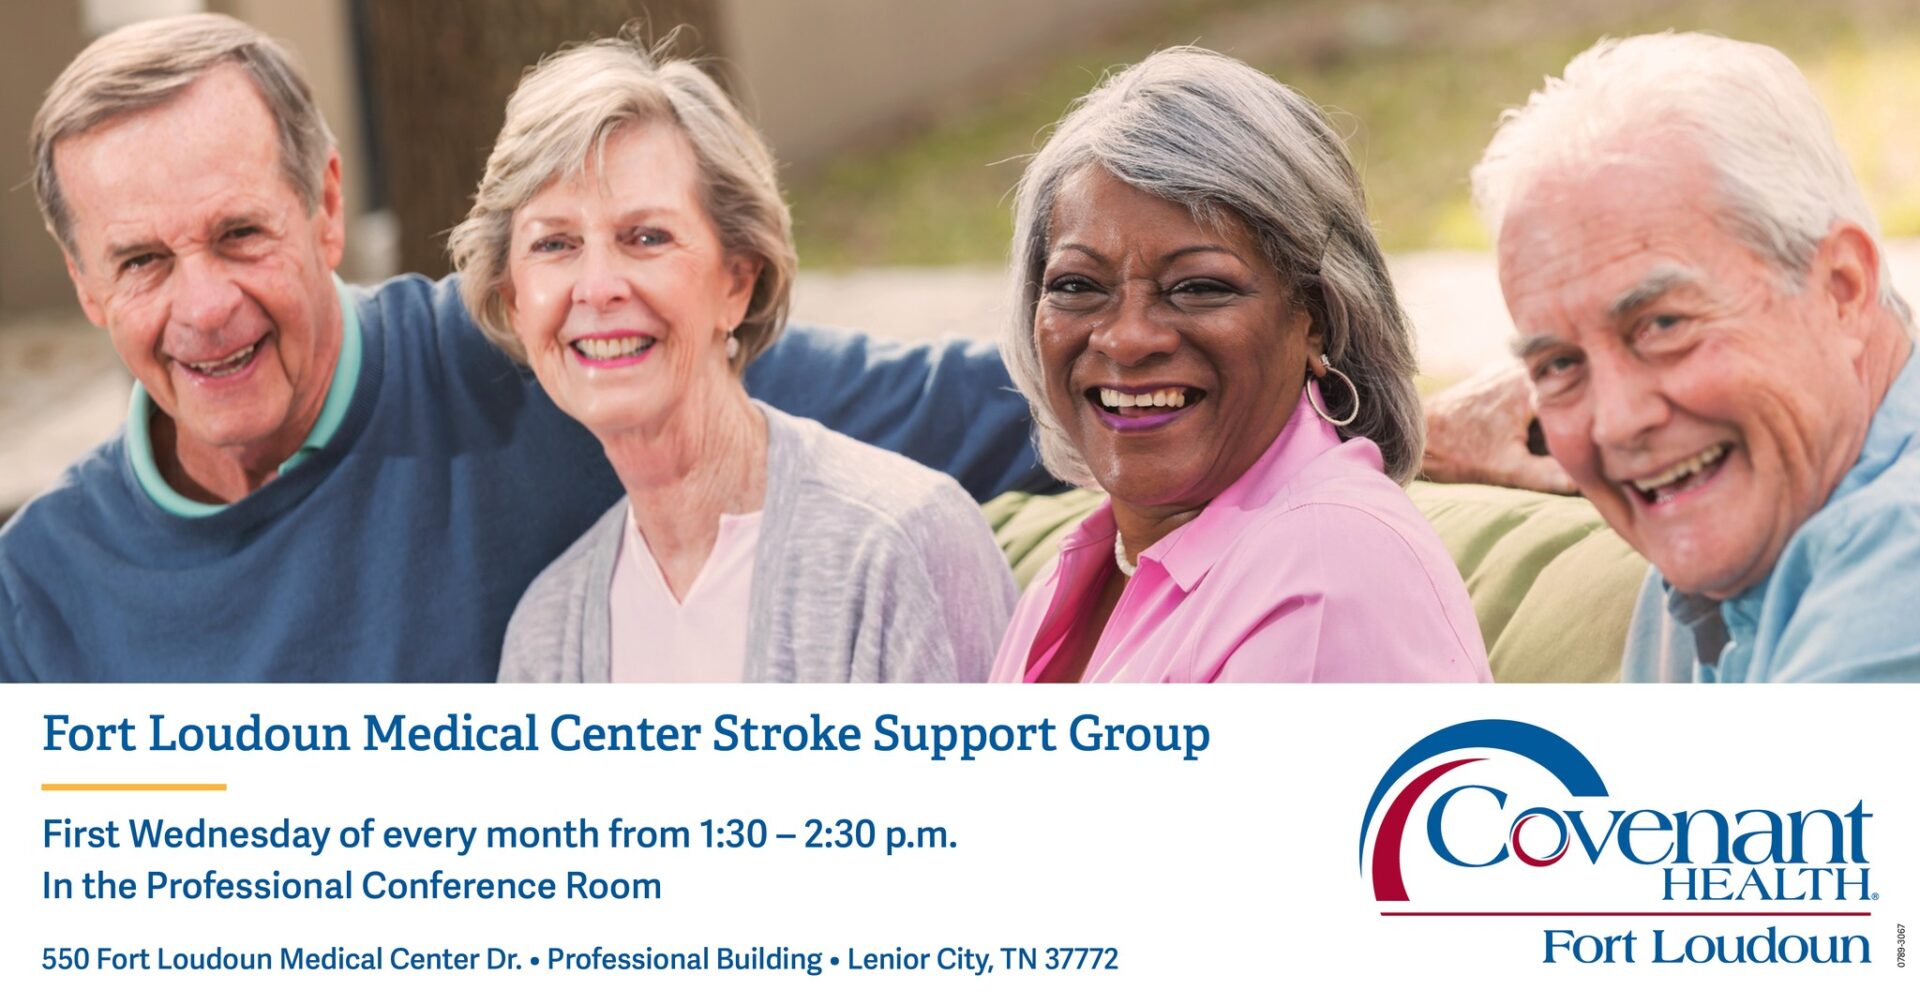 stroke support group promo image.